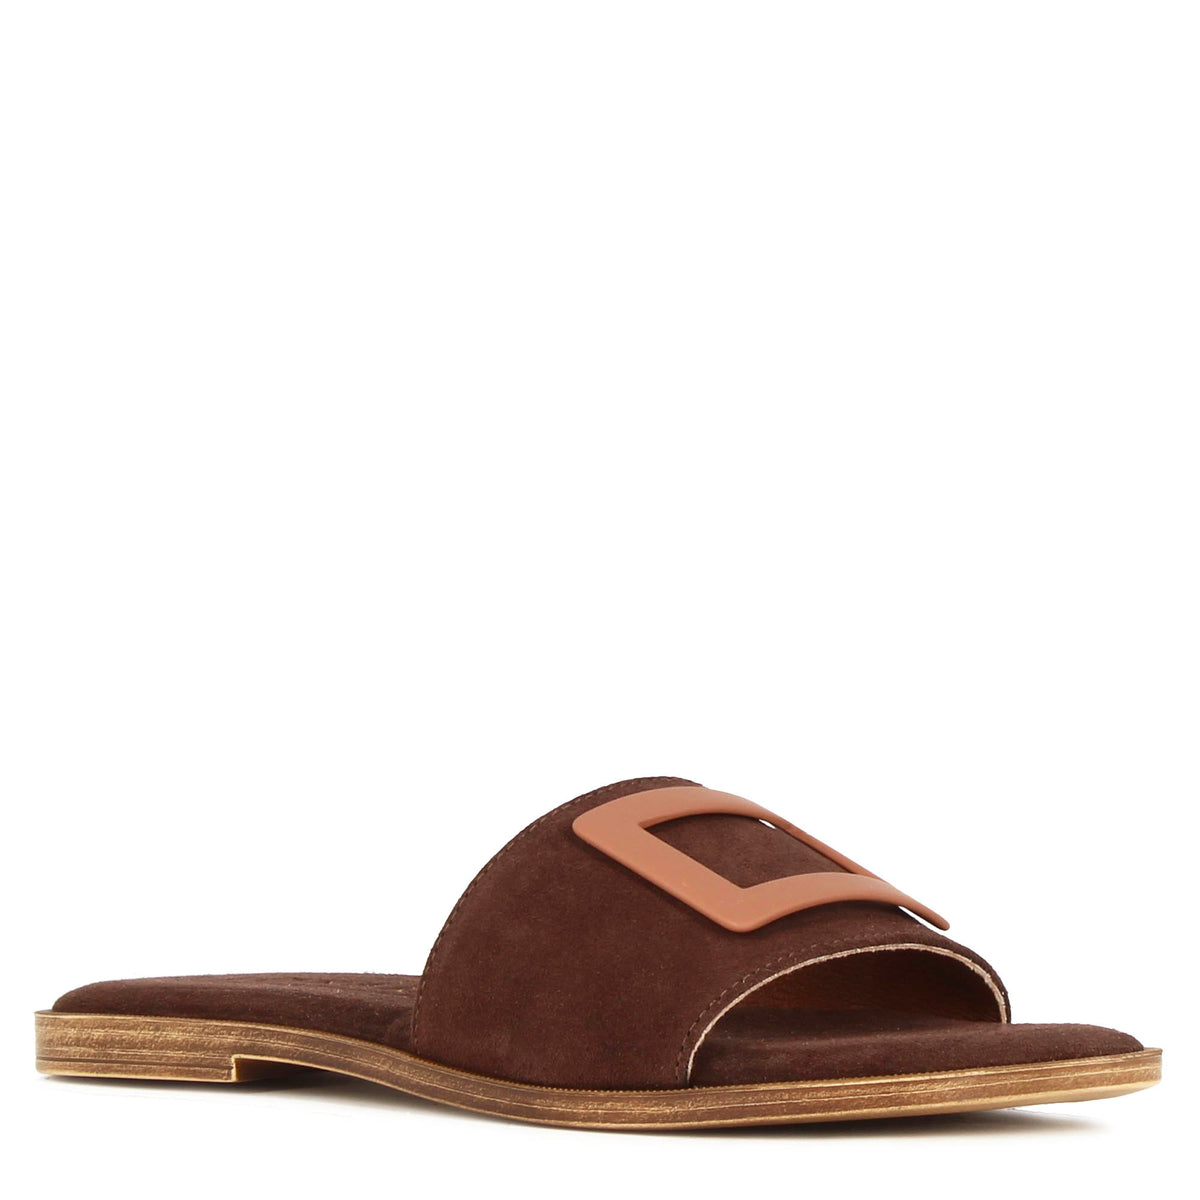 Women's suede slippers with dark brown band